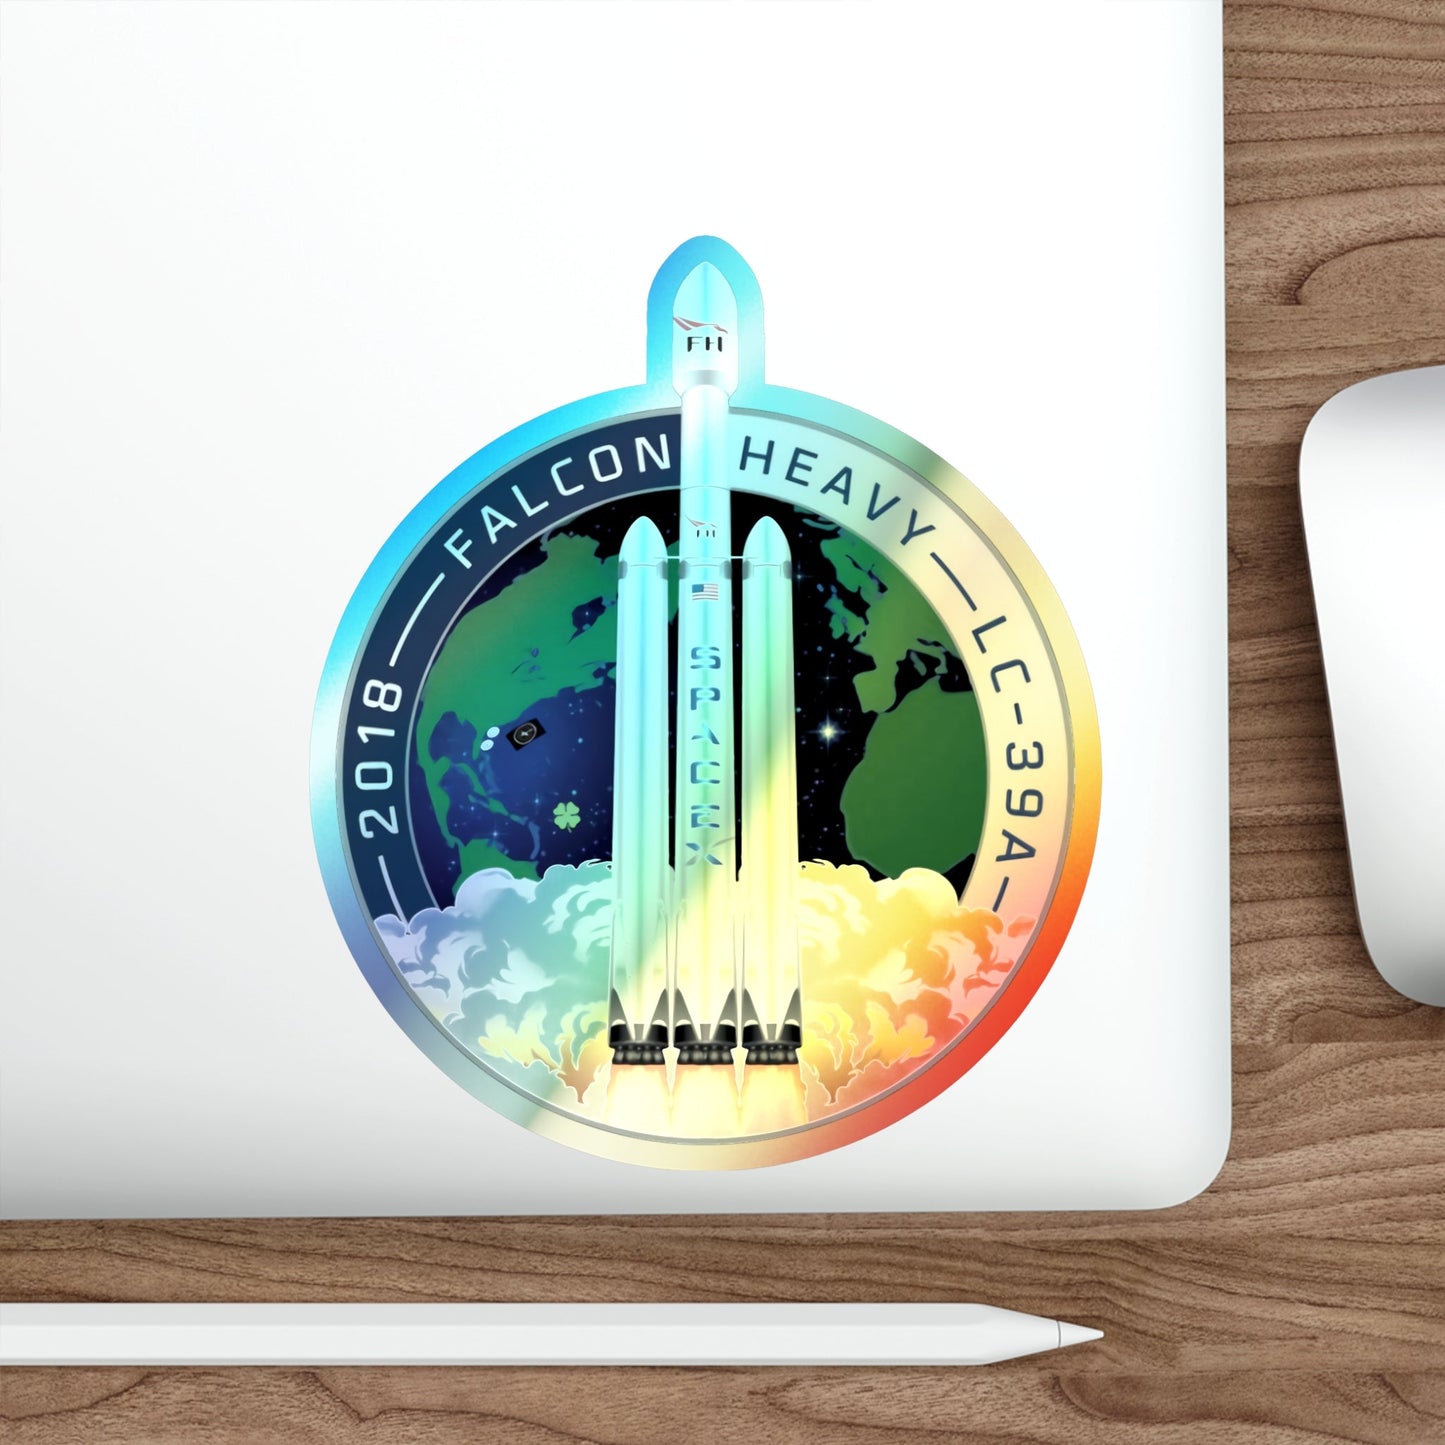 Falcon Heavy Demo (SpaceX) Holographic STICKER Die-Cut Vinyl Decal-The Sticker Space